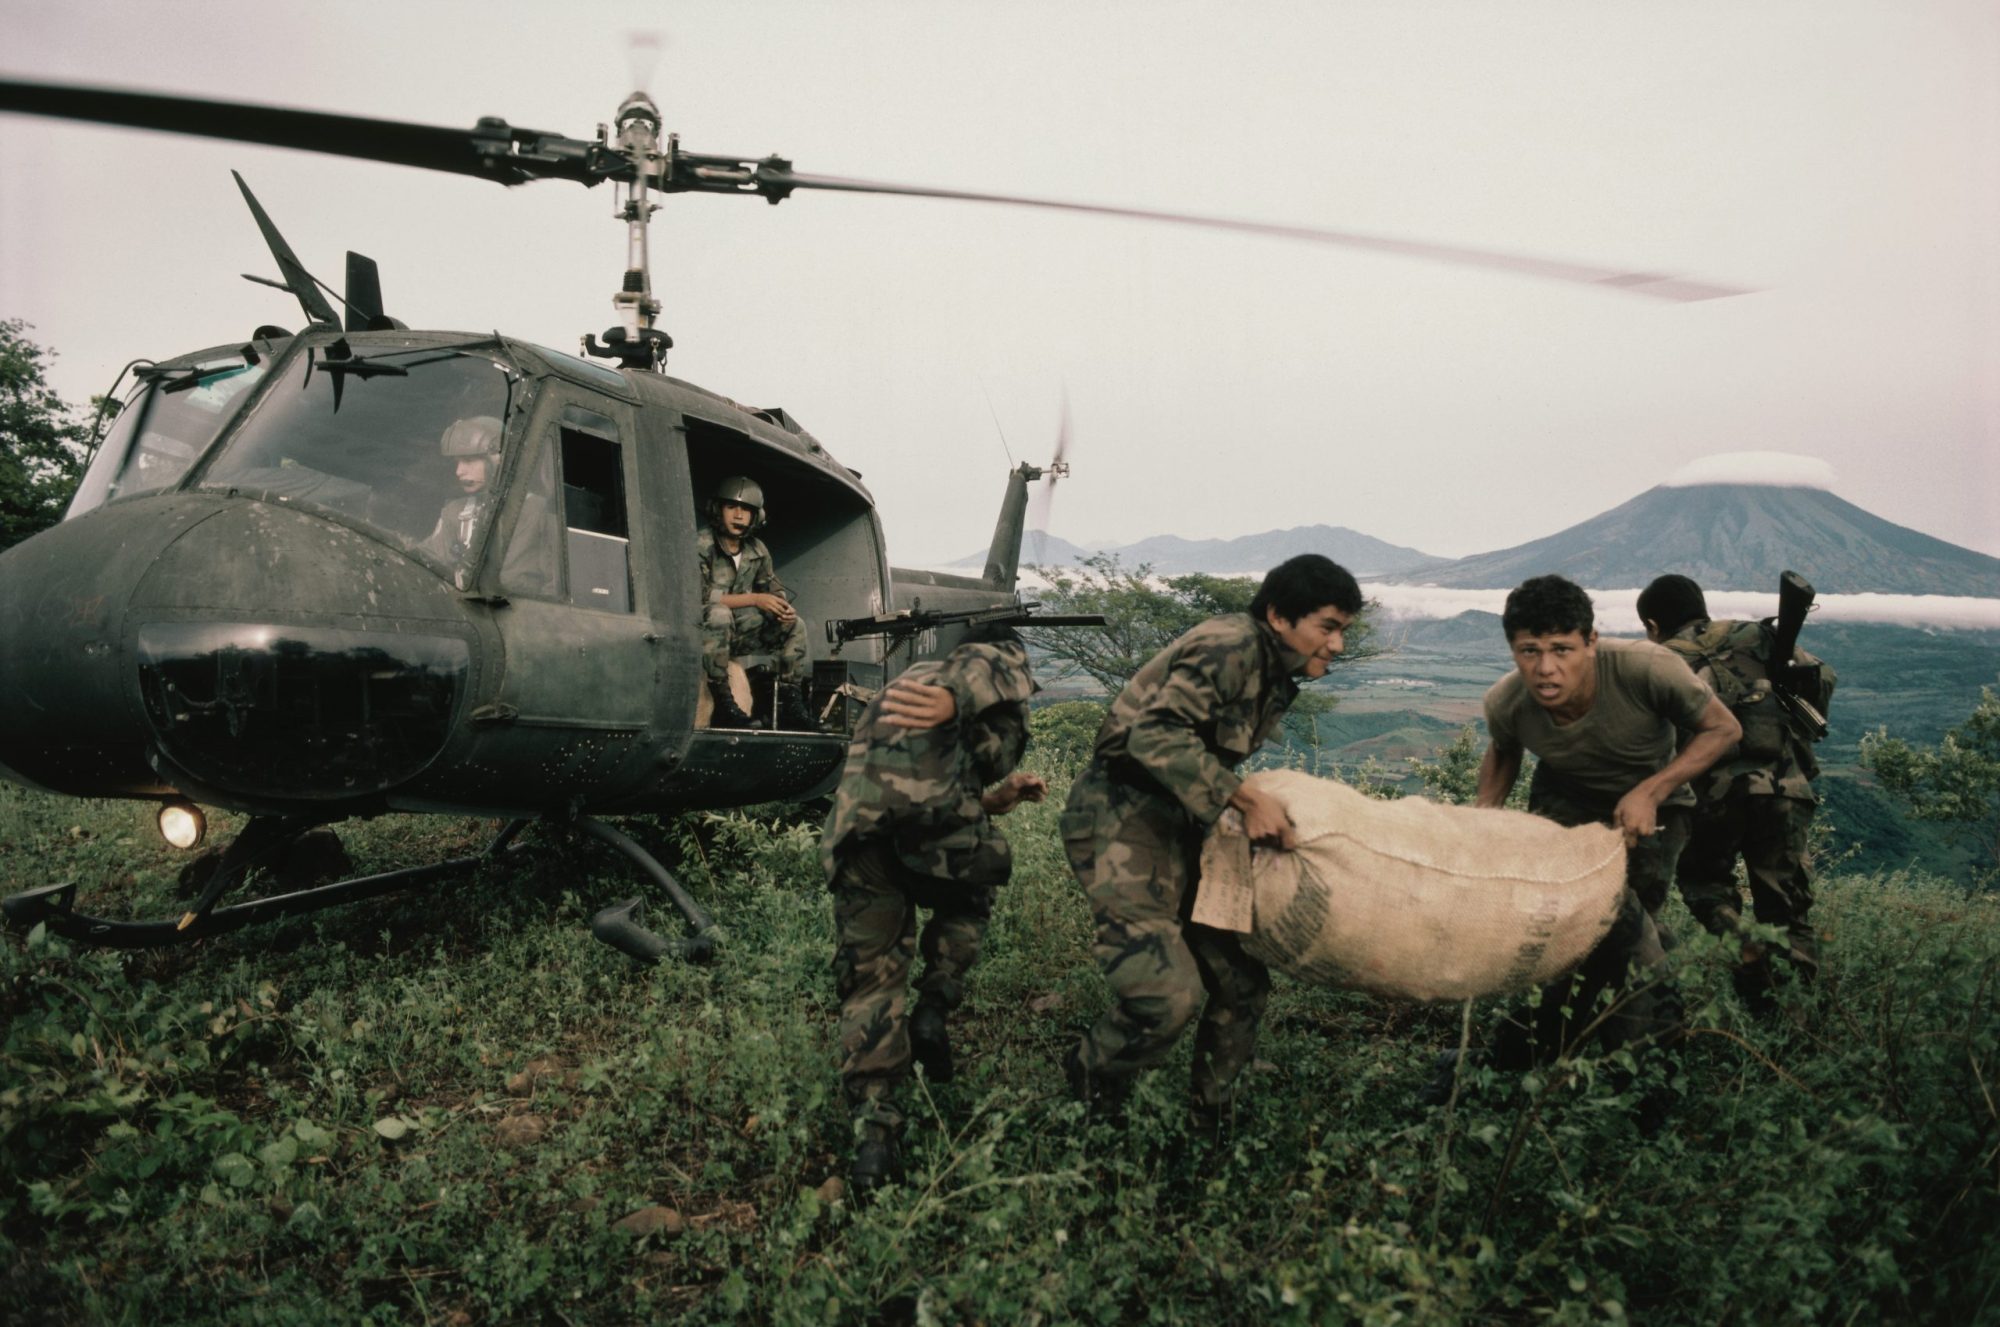 Salvadorian Soldiers Deliver Supplies in U.S. Made Helicopters